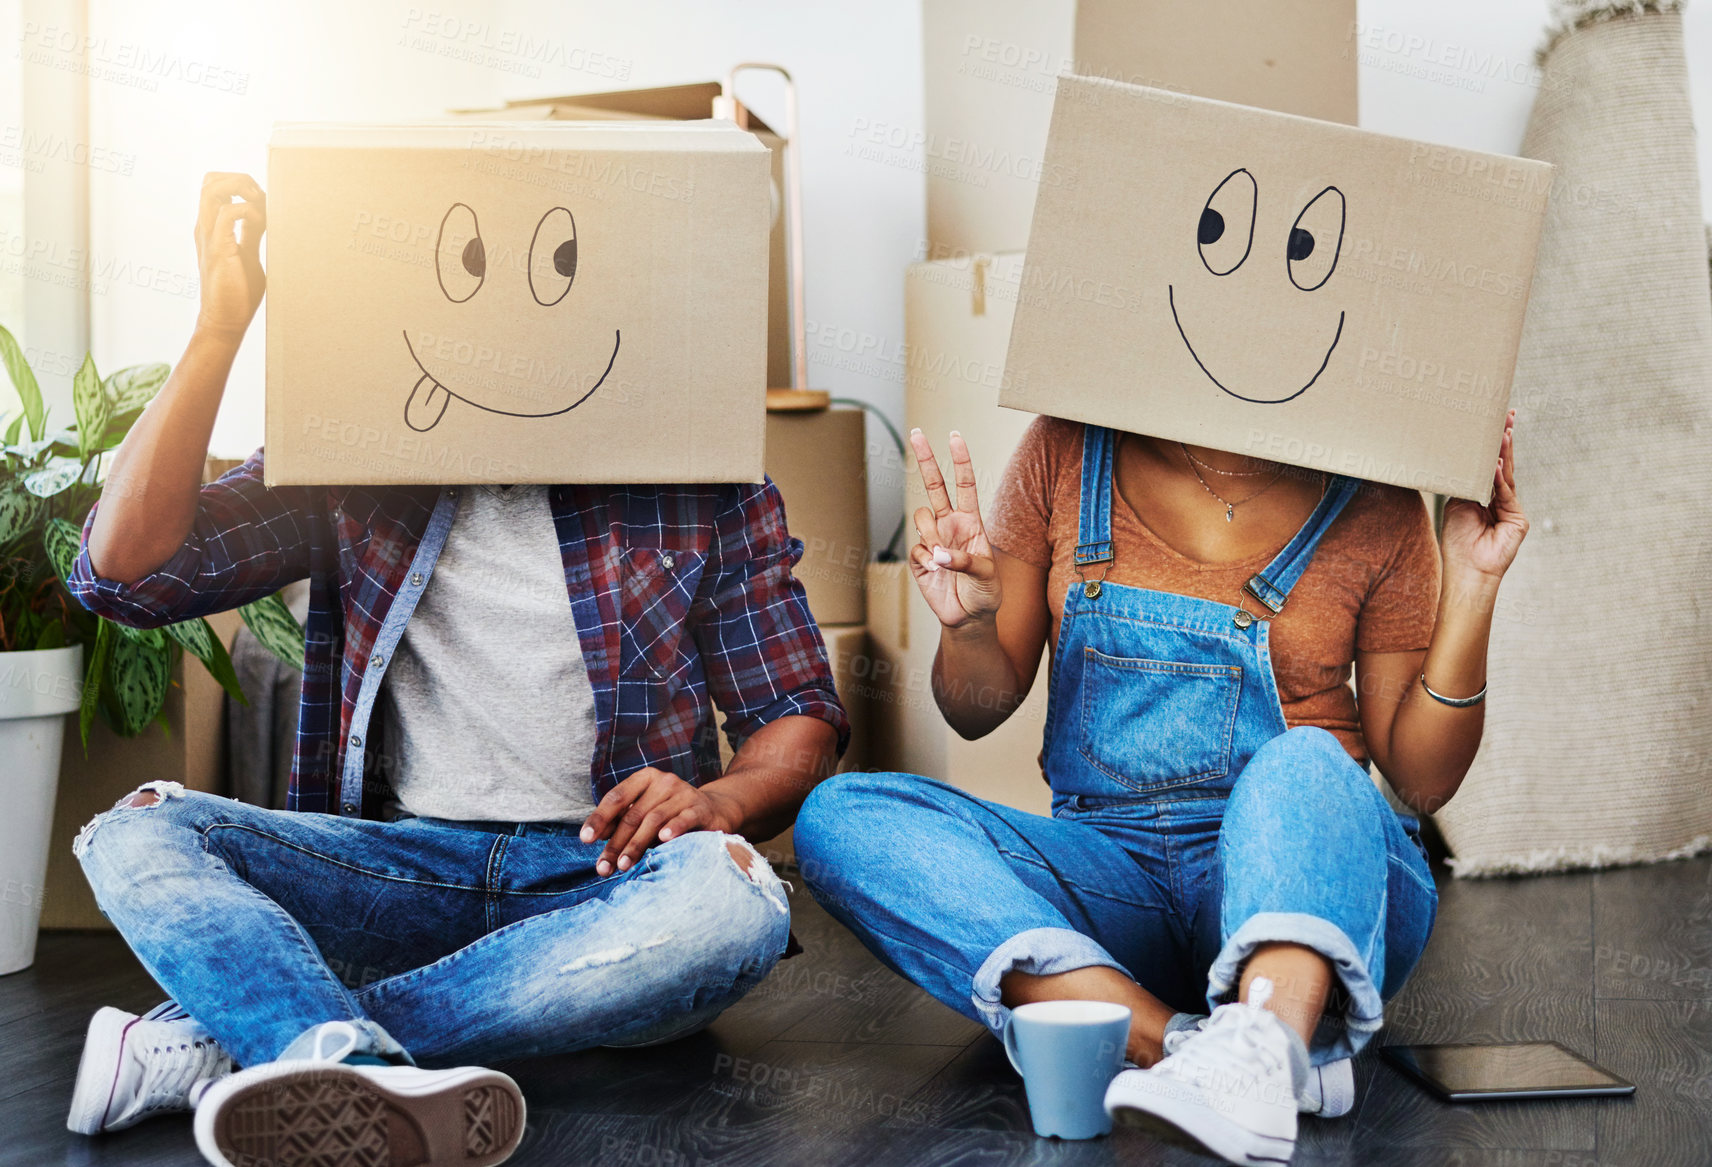 Buy stock photo Shot of an unrecognizable couple moving house